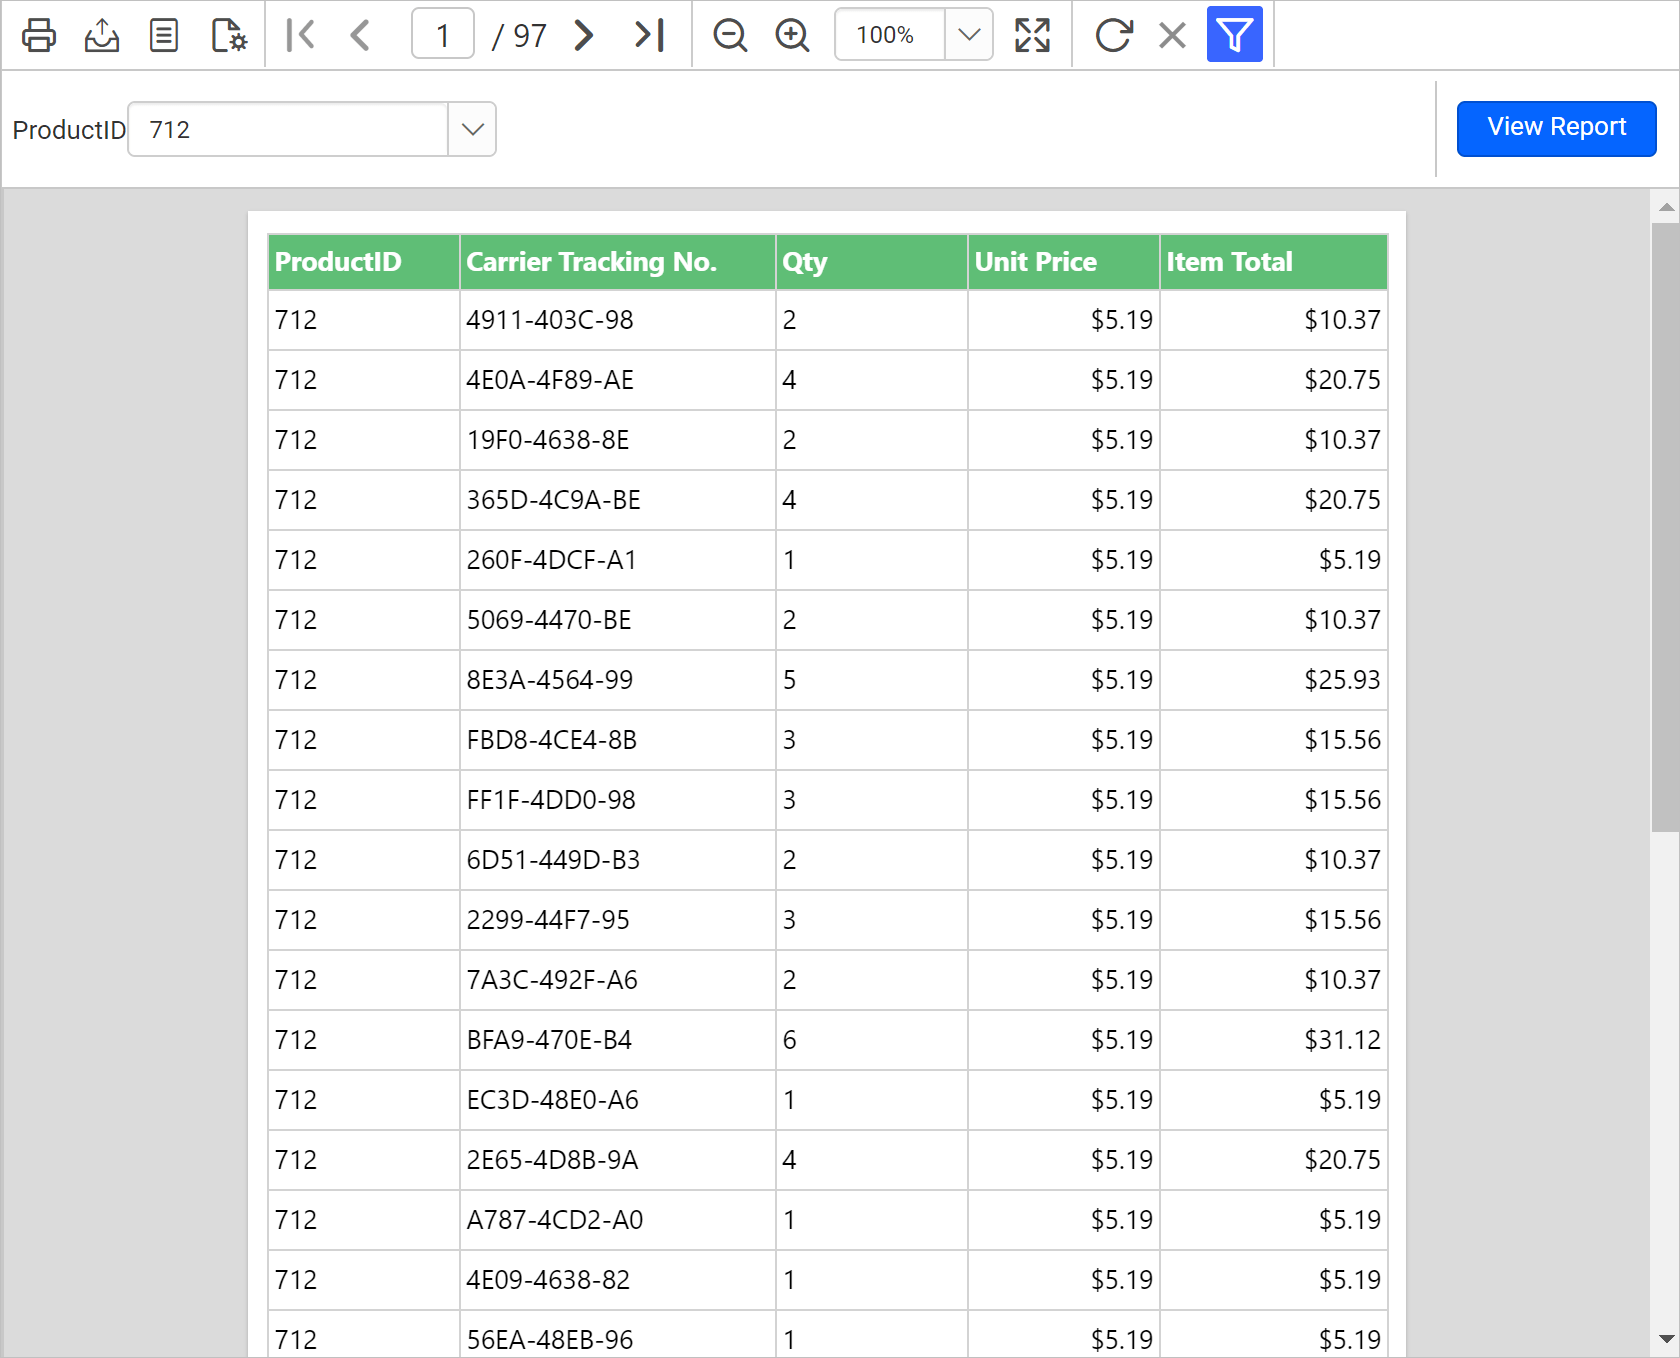 Filter product id values